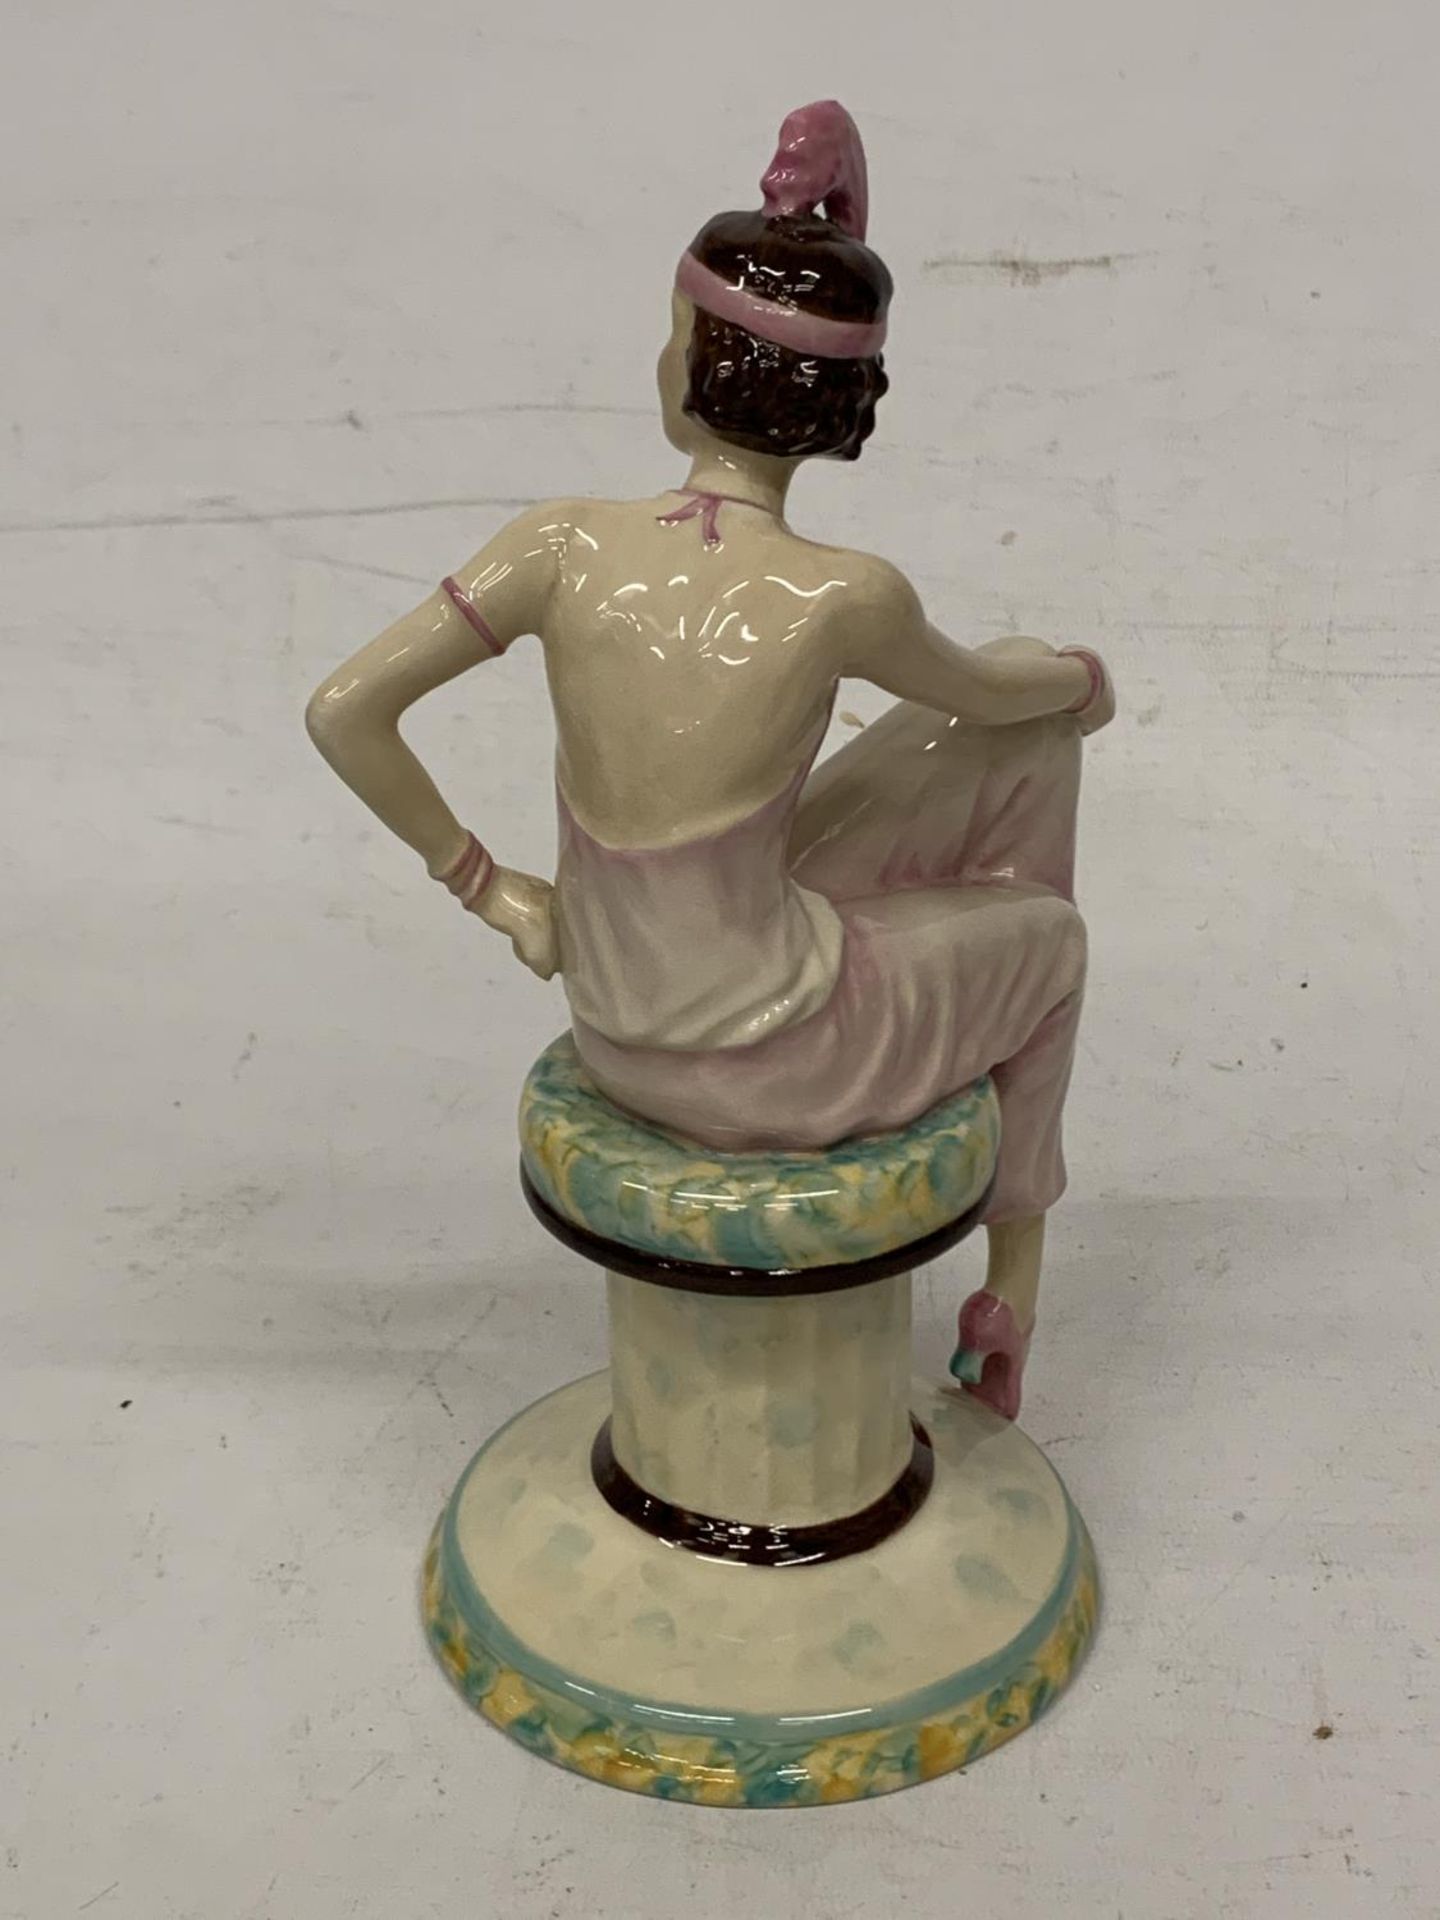 A LIMITED EDITIONM PEGGY DAVIS 'DANIELLE' FIGURINE (SIGNED IN GOLD) - Image 4 of 4